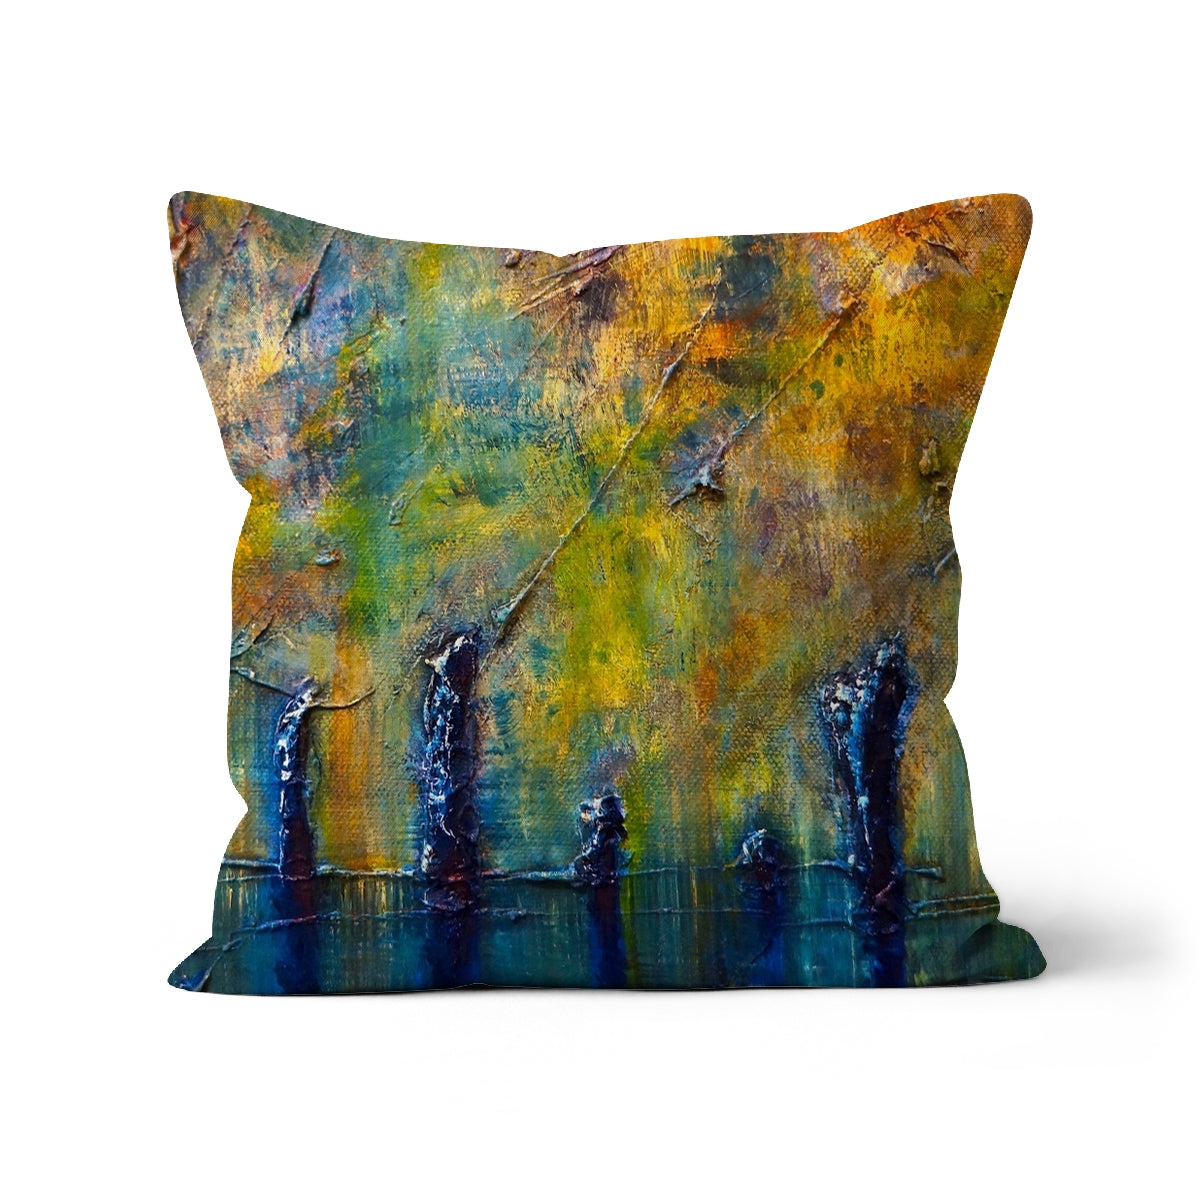 Stenness Moonlight Orkney Art Gifts Cushion-Cushions-Orkney Art Gallery-Faux Suede-24"x24"-Paintings, Prints, Homeware, Art Gifts From Scotland By Scottish Artist Kevin Hunter